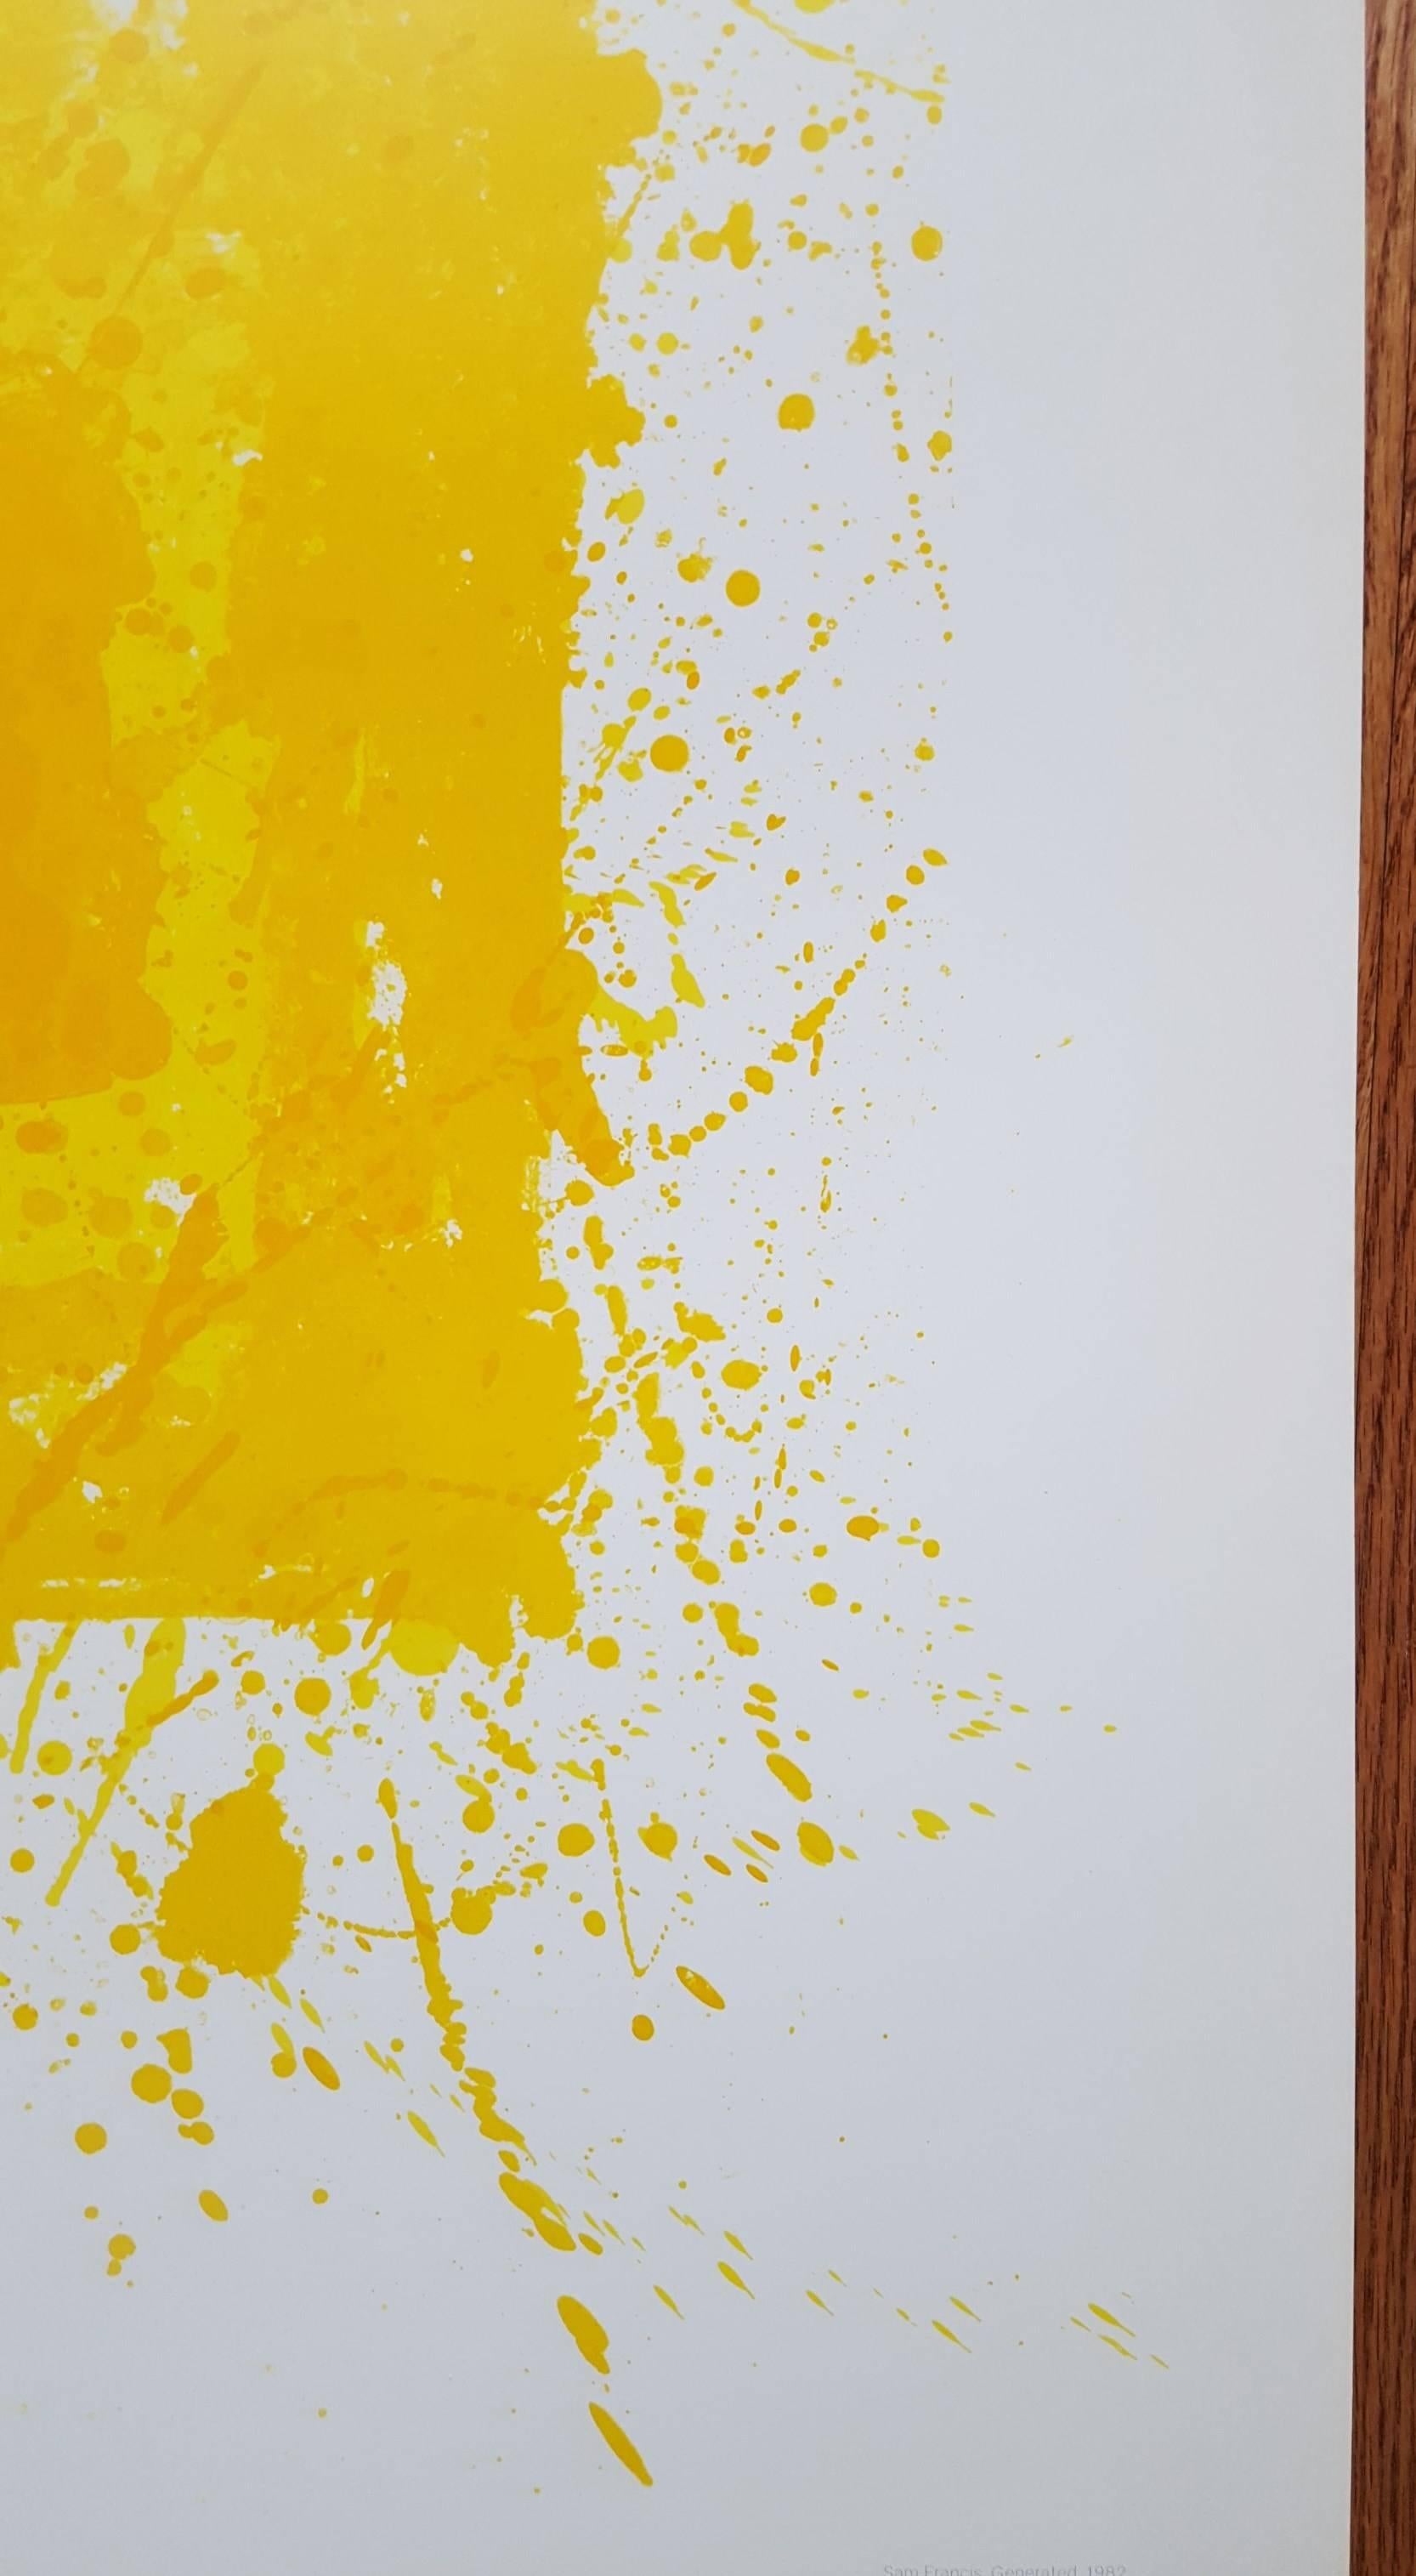 An original offset-lithograph, exhibition poster on smooth wove paper after American artist Sam Francis (1923-1994) titled 